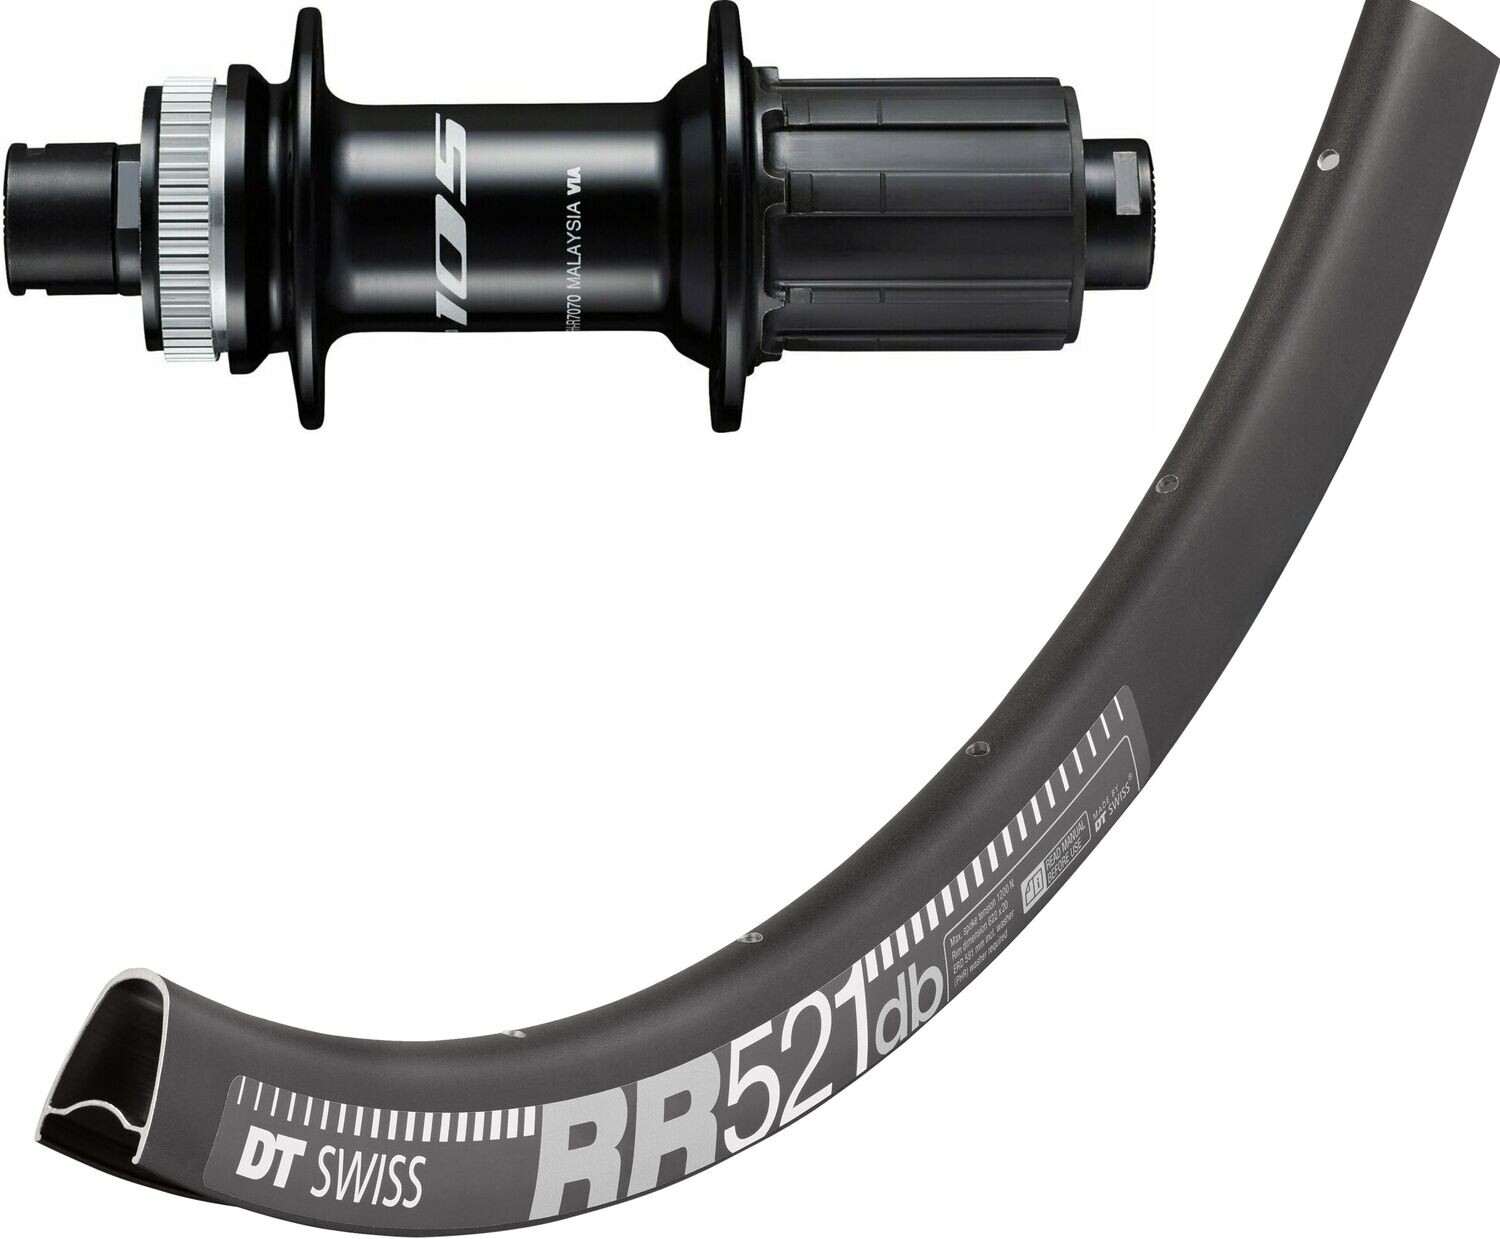 DT Swiss RR521 rim with Shimano 105 R707 hubs.